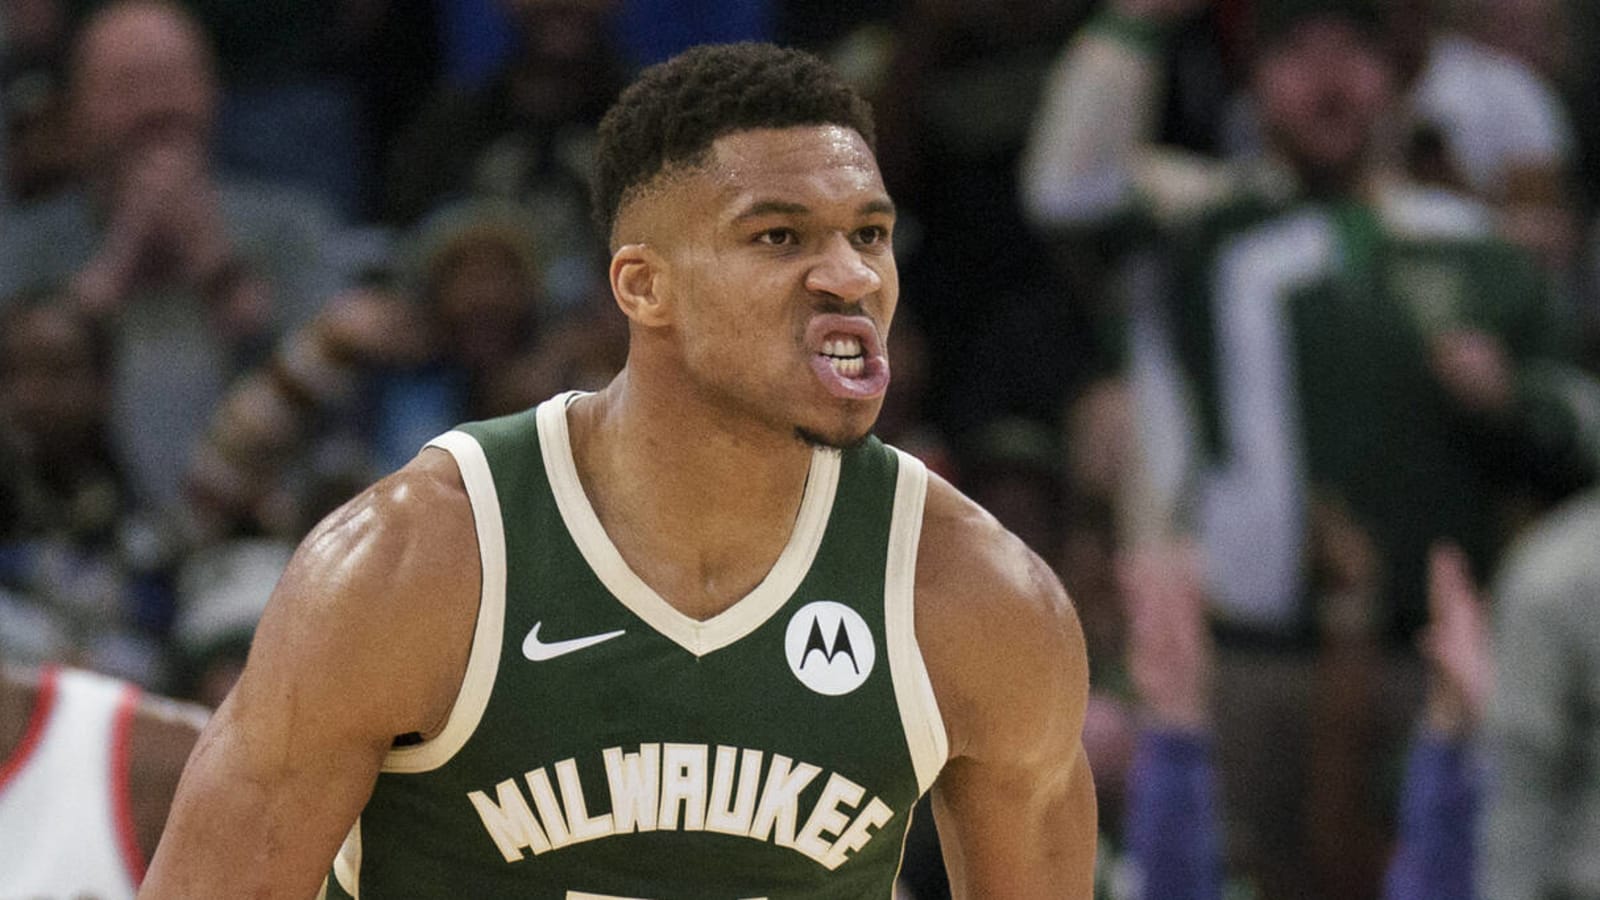 Watch: Giannis uses one dribble from half-court to dunk